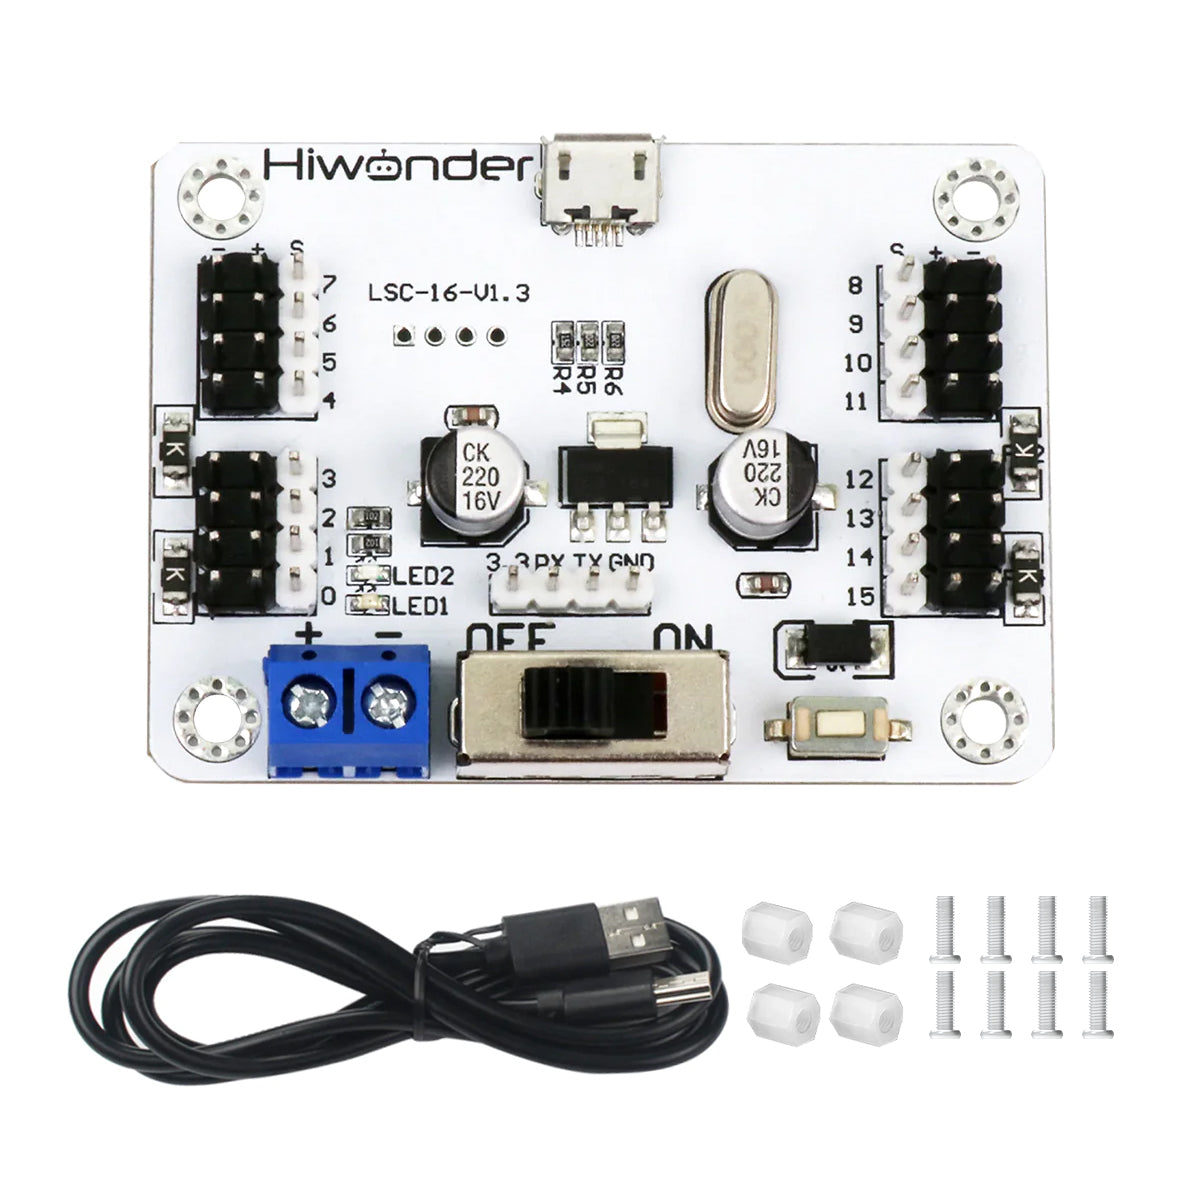 LSC-16: Hiwonder 16 Channel Servo Controller with Over-Current Protection